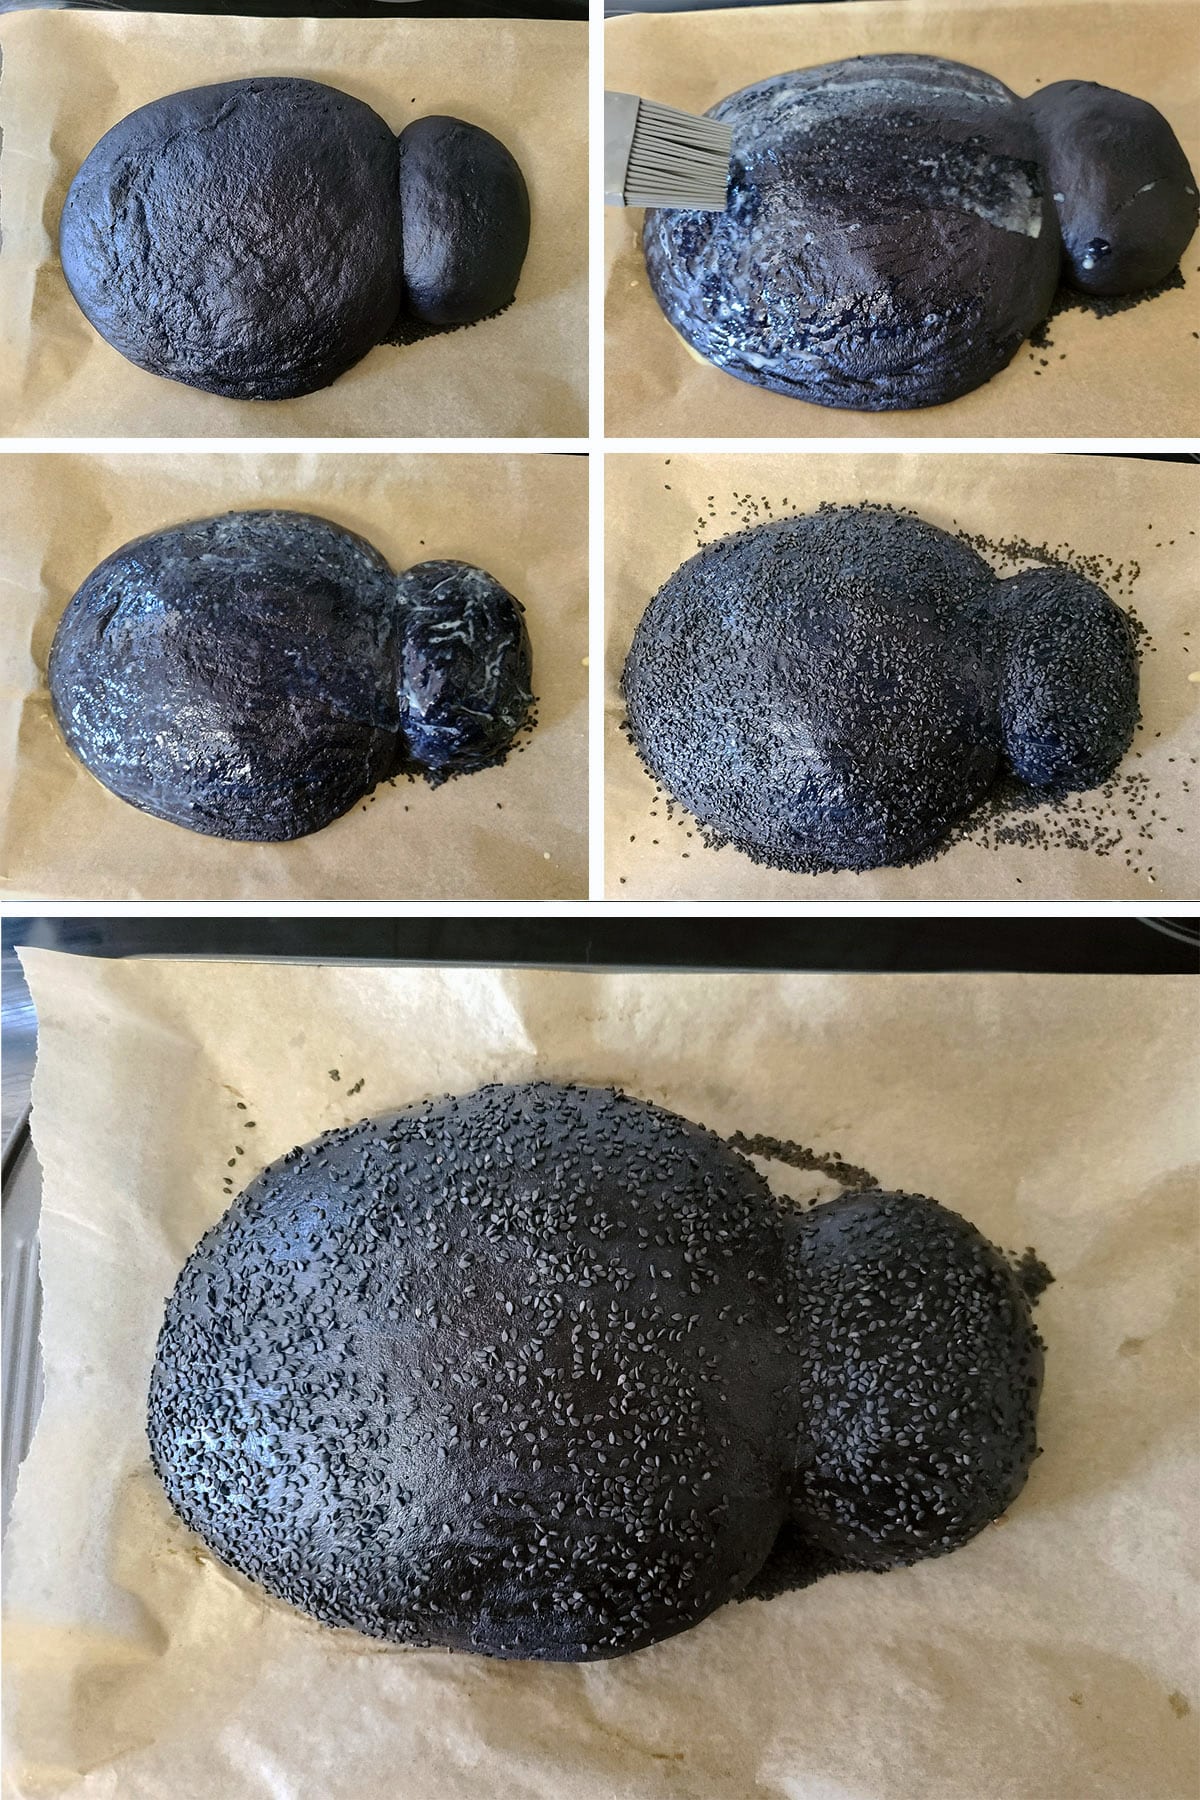 A 5 part image showing the spider head and body before and after rising again, then befing brushed with egg, coated in sesame seeds, and baked.